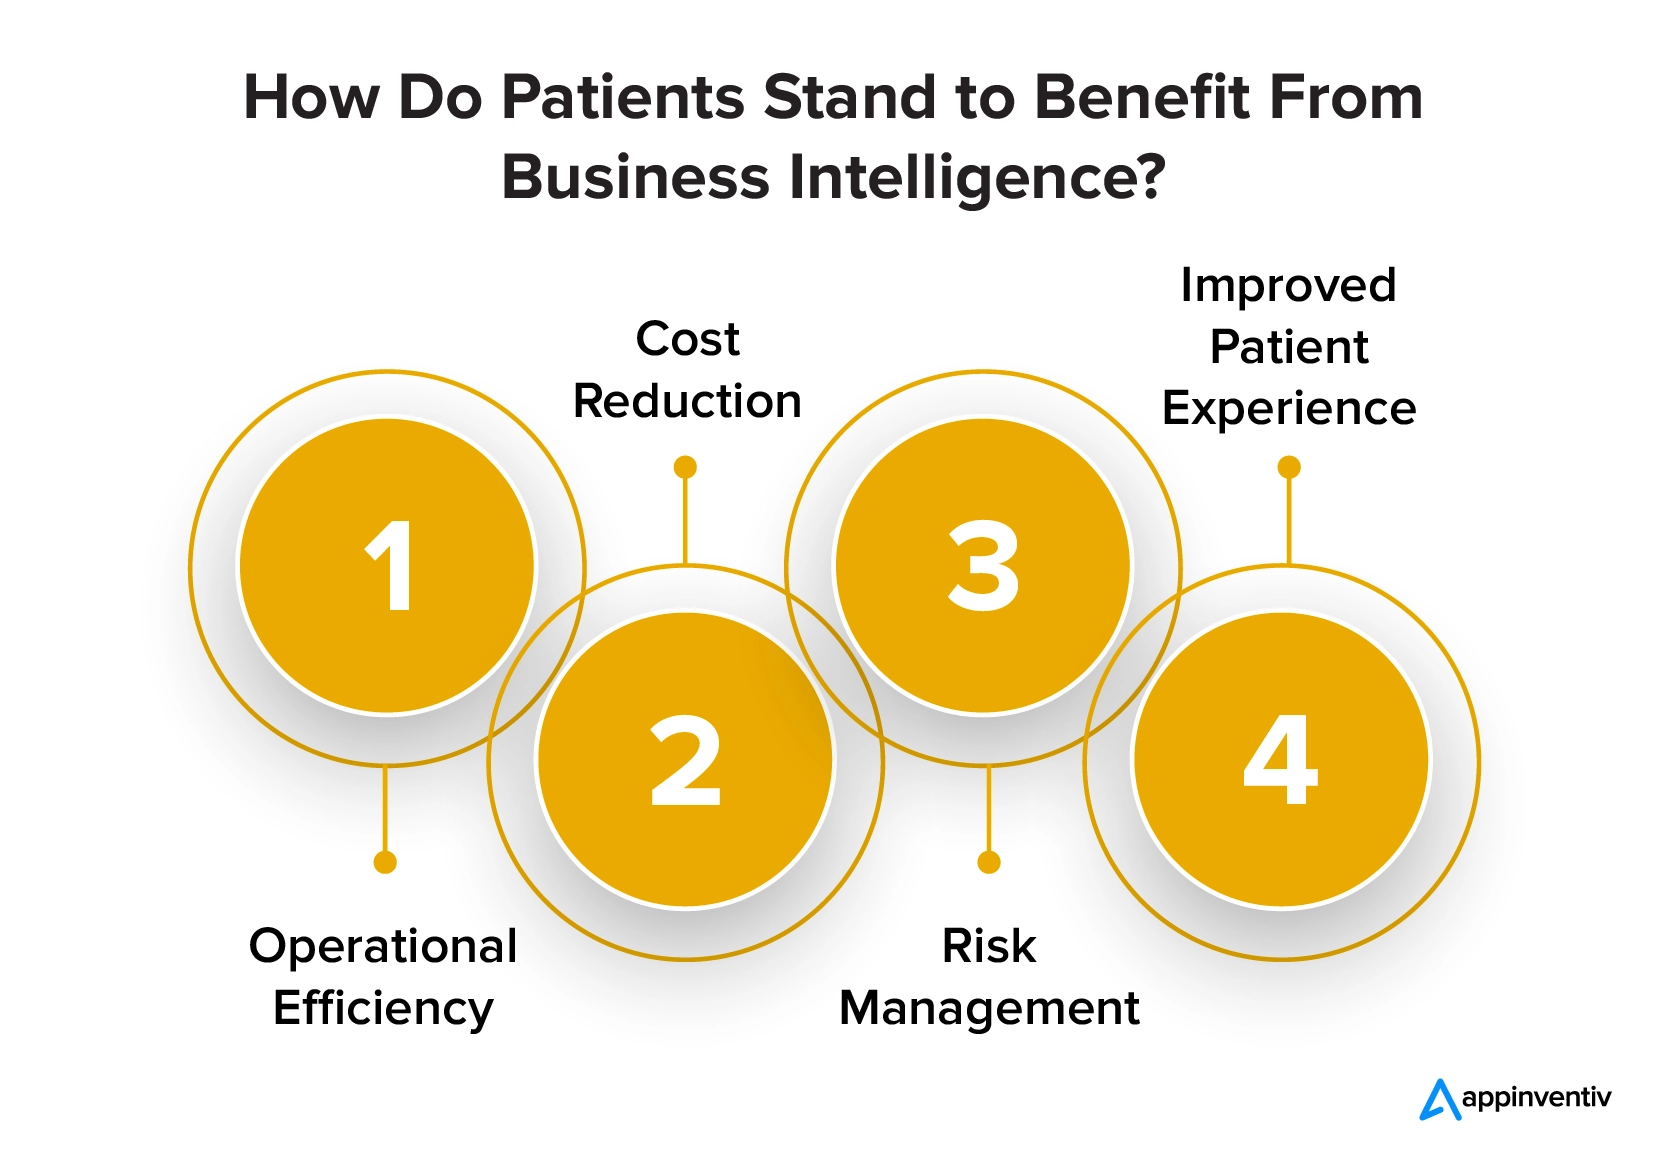 Benefits of business intelligence in patient care 